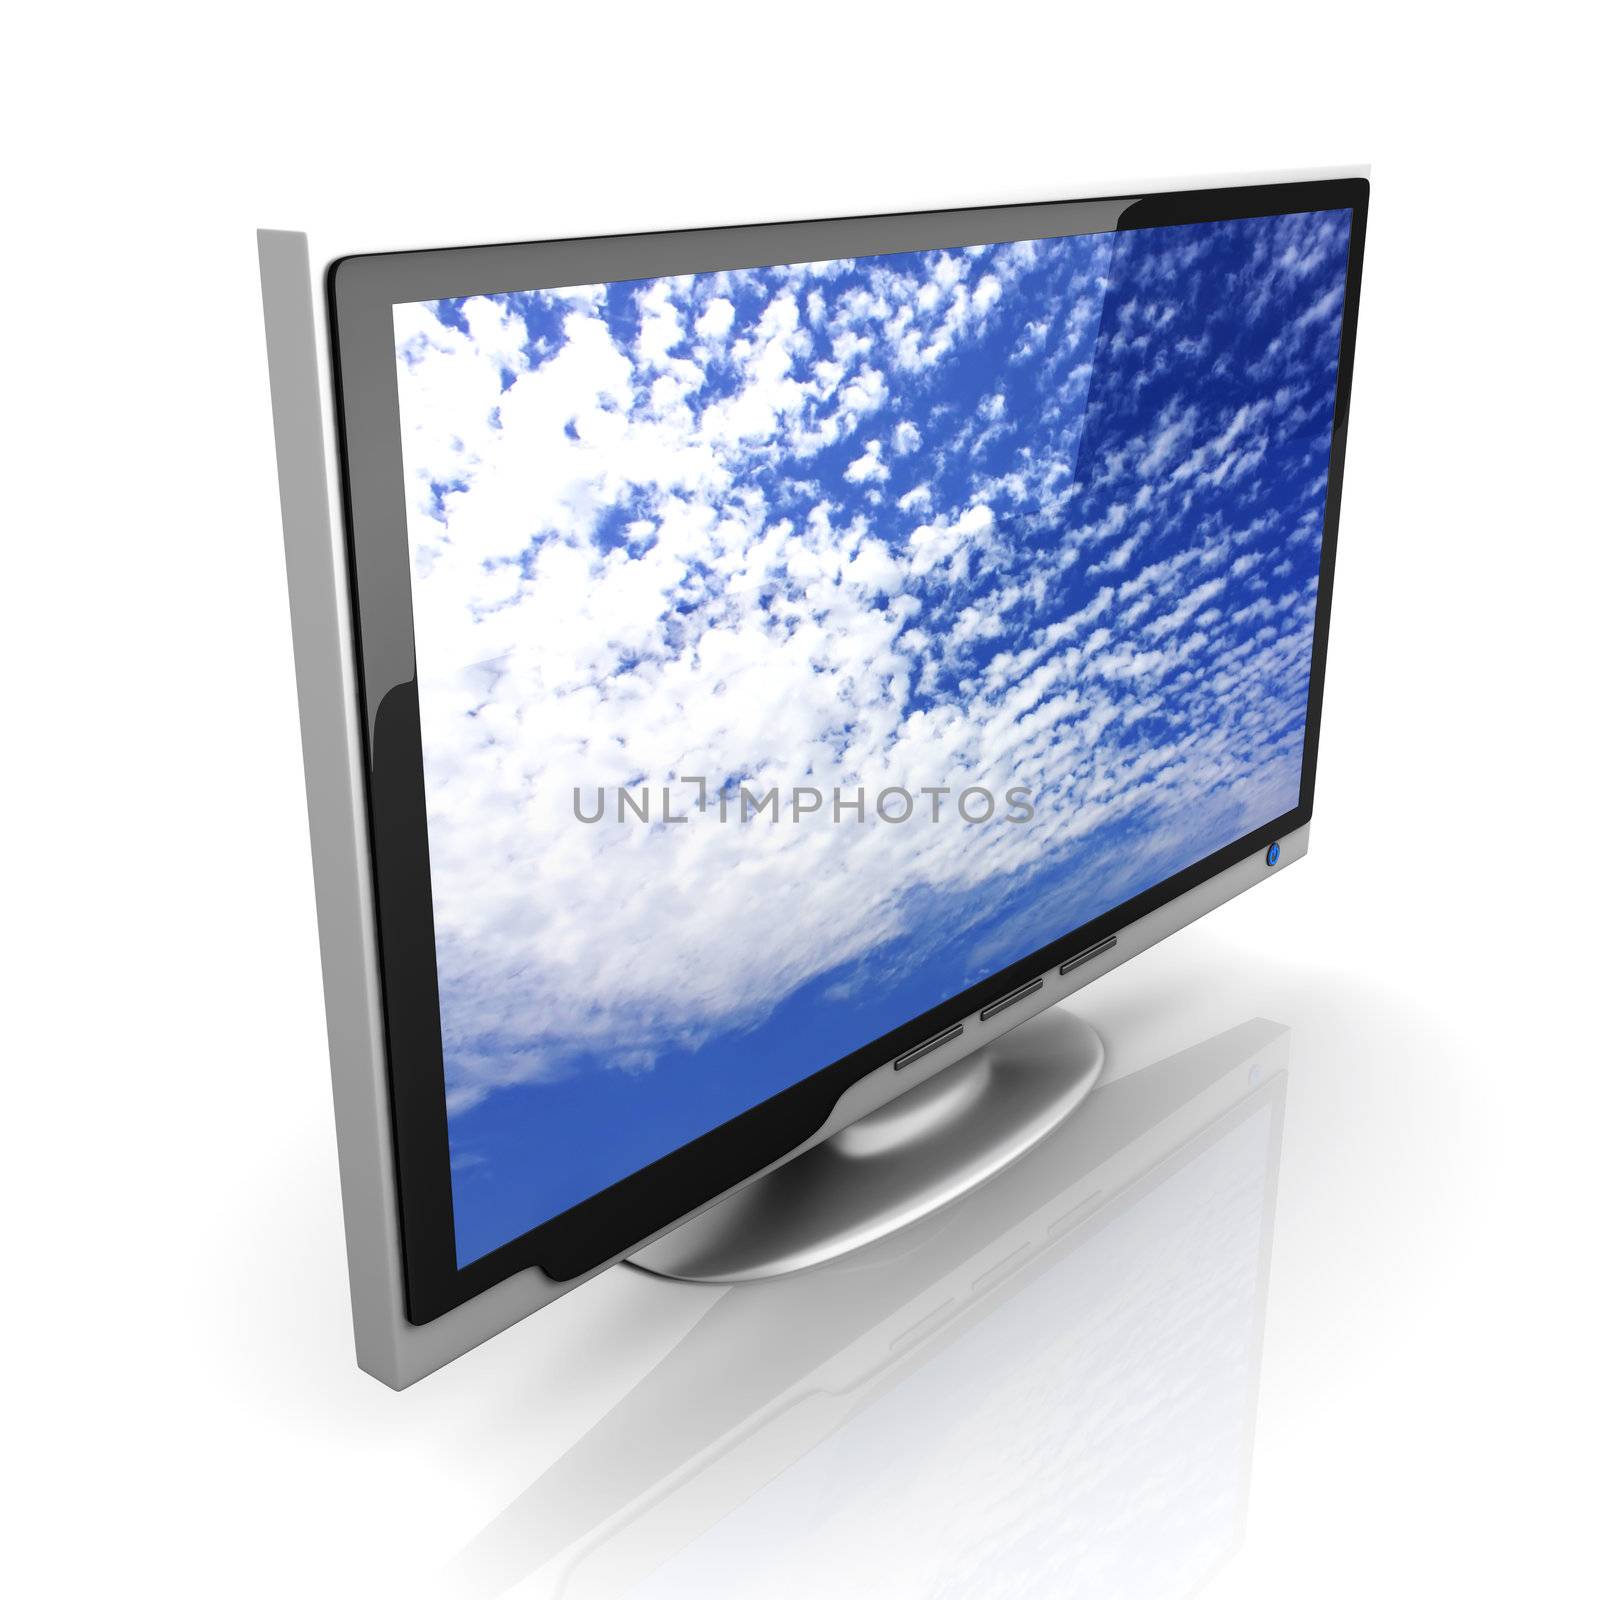 HDTV by Spectral